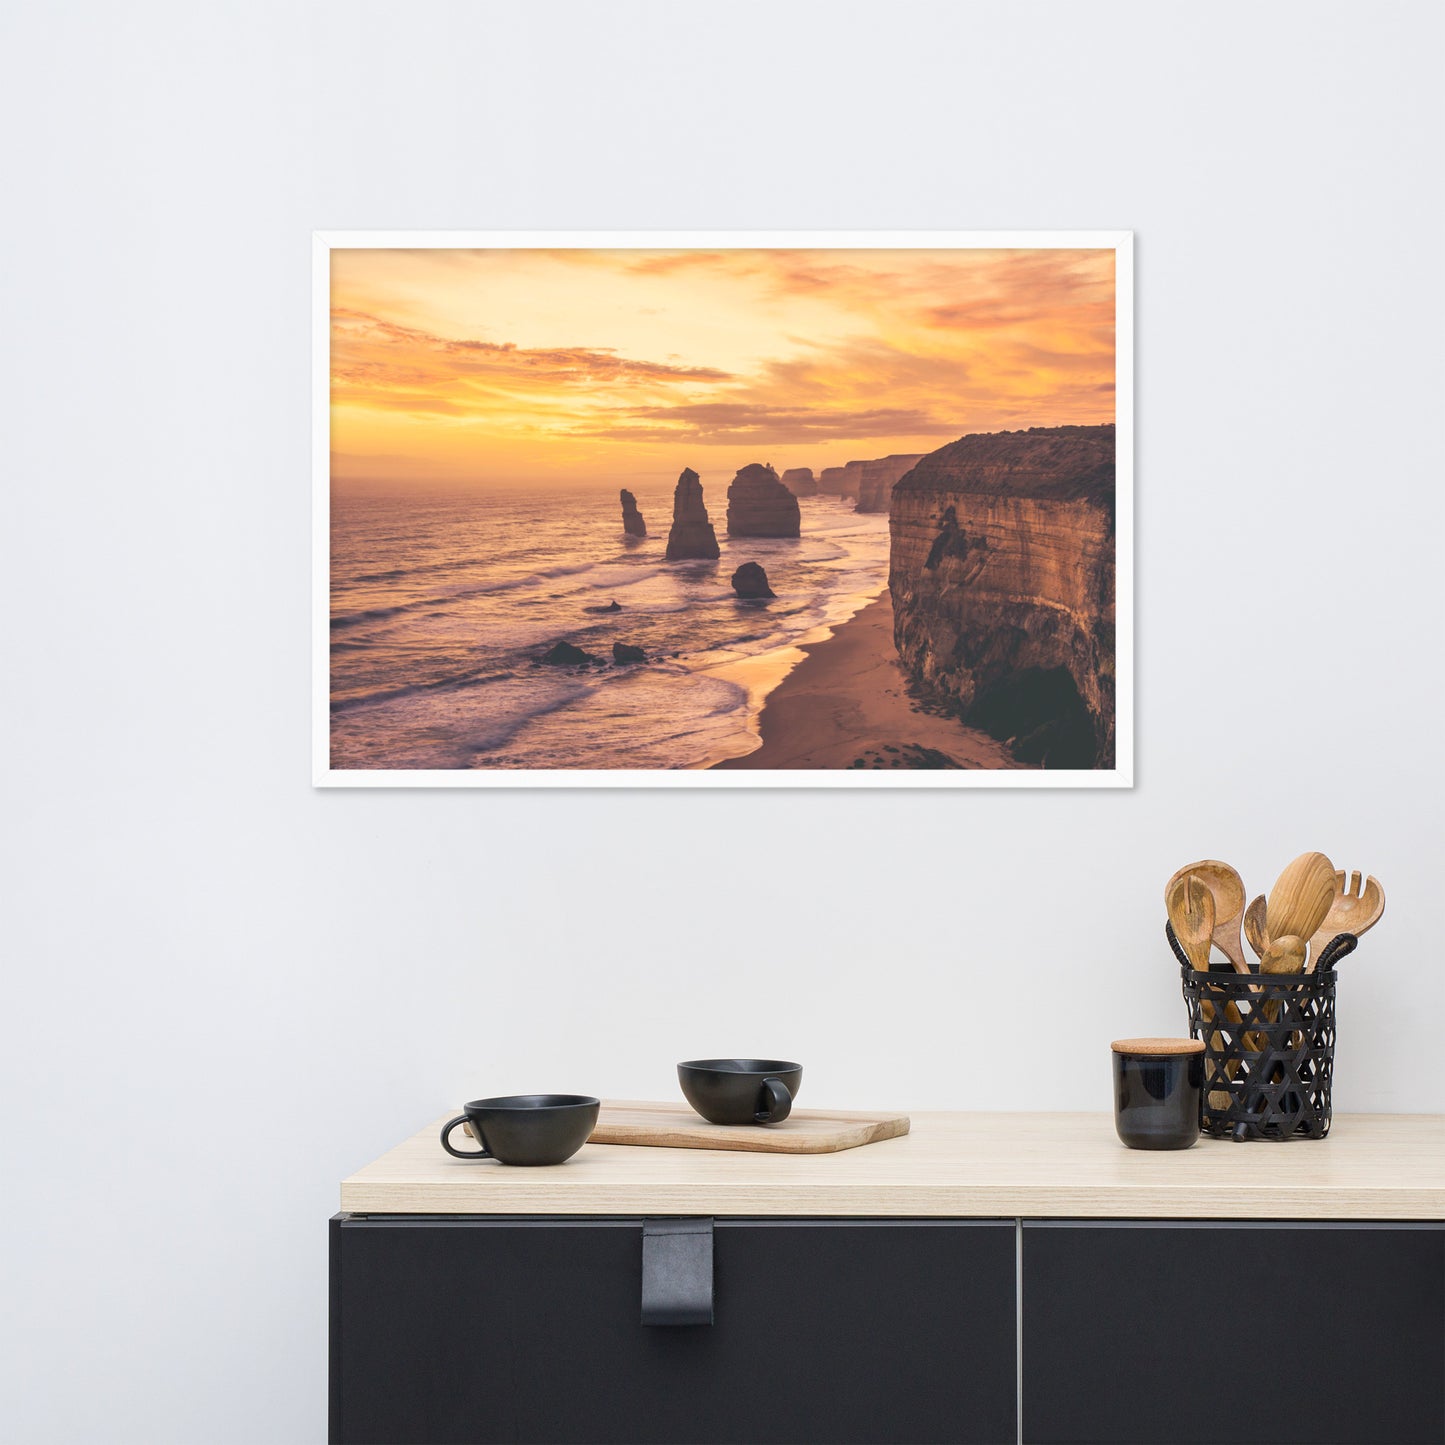 Twelve Apostles at Sunset Victoria, Australia with Daydream Effect Framed Wall Art Prints